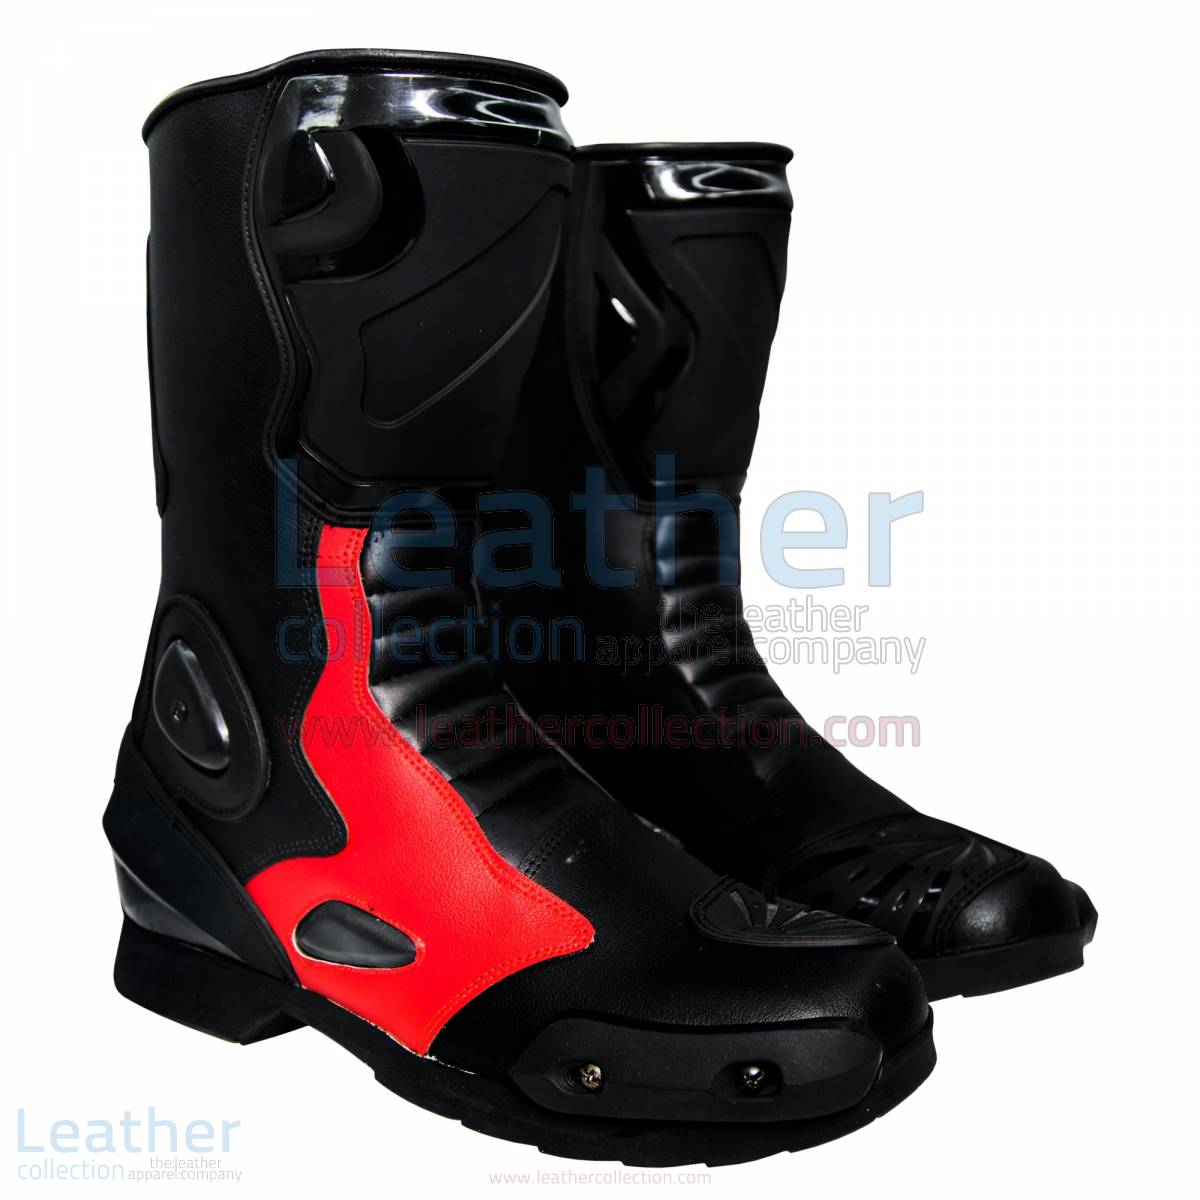 Silverstone Motorcycle Race Boots